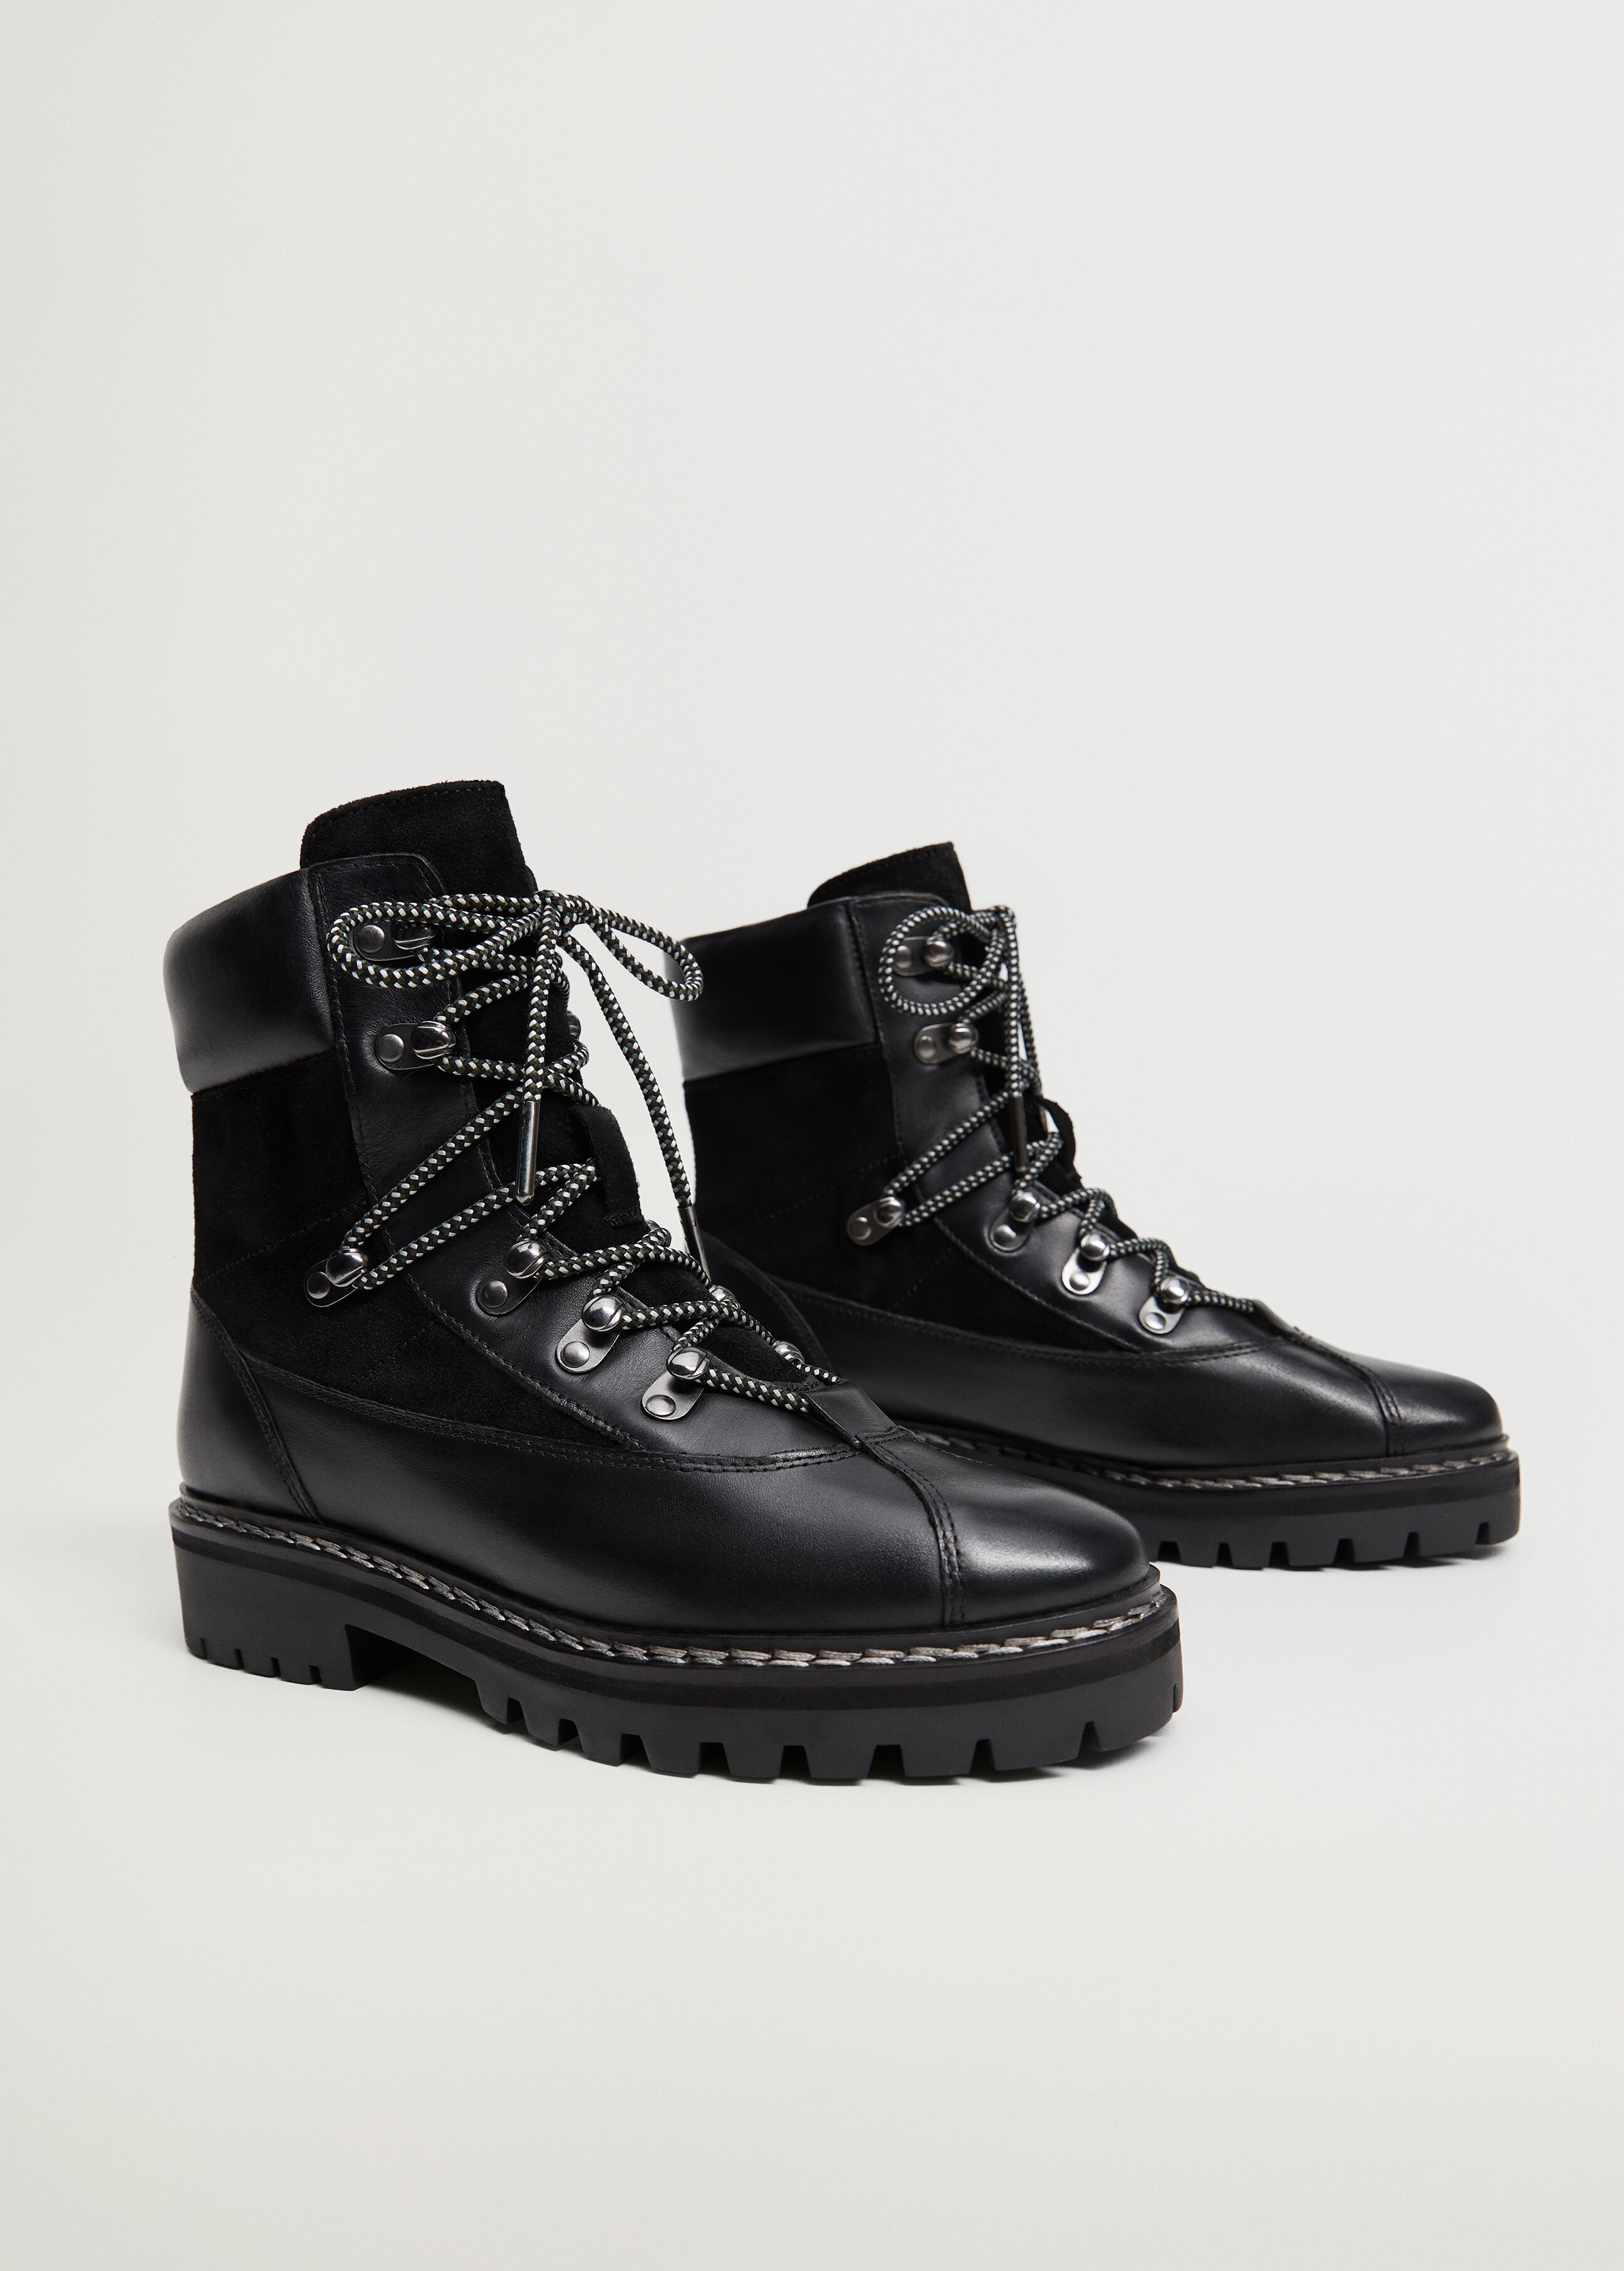 Contrast lace-up leather boots - Medium plane